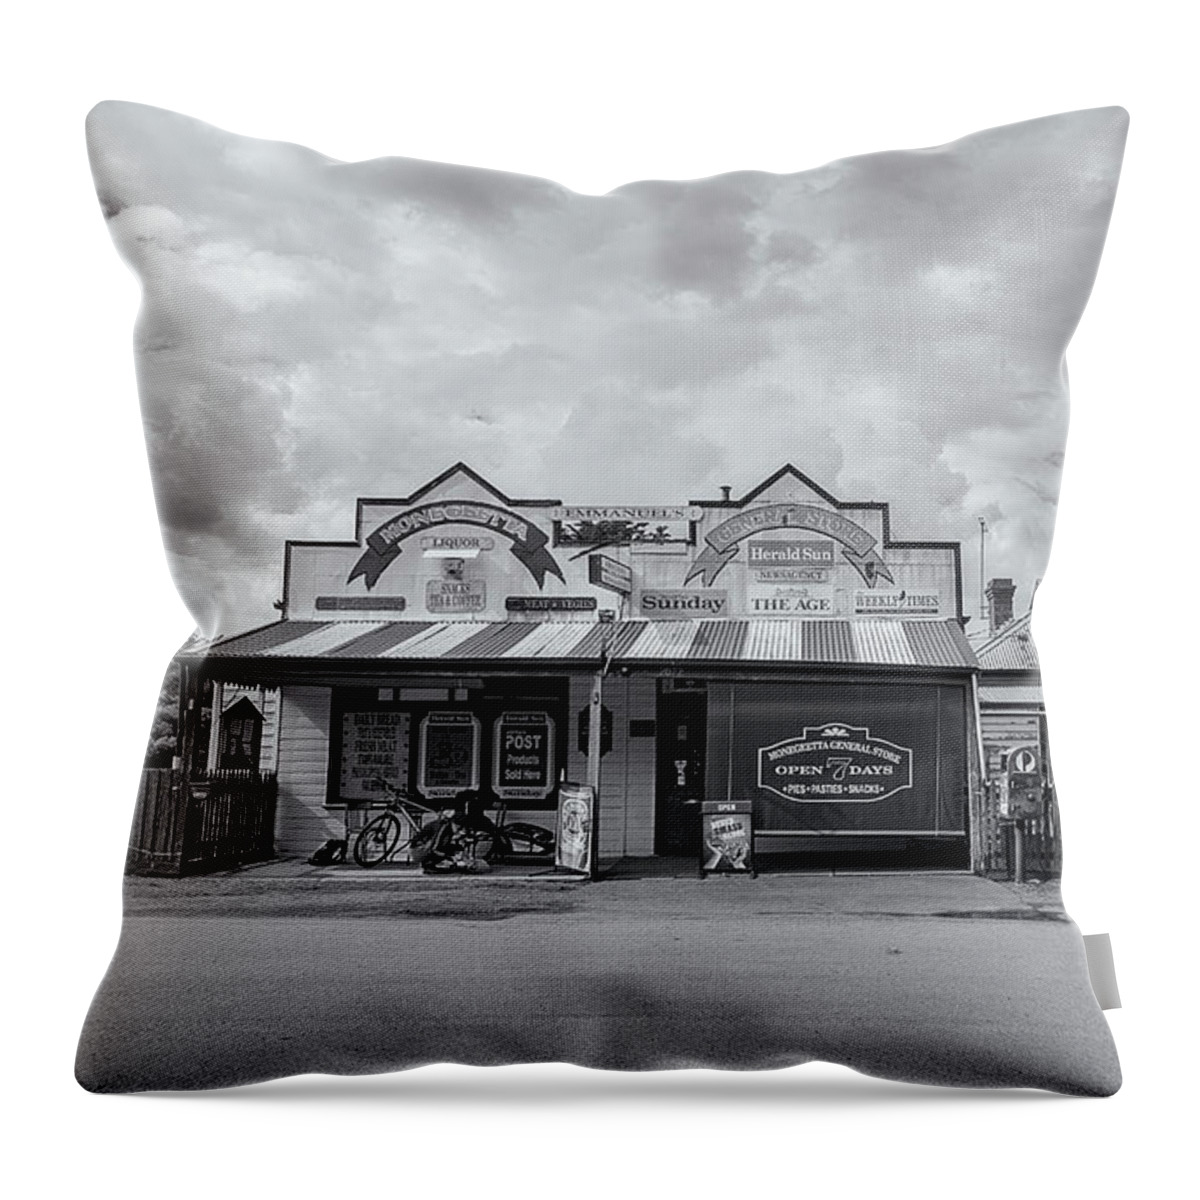 Store Throw Pillow featuring the photograph Monegeetta General Store by Linda Lees